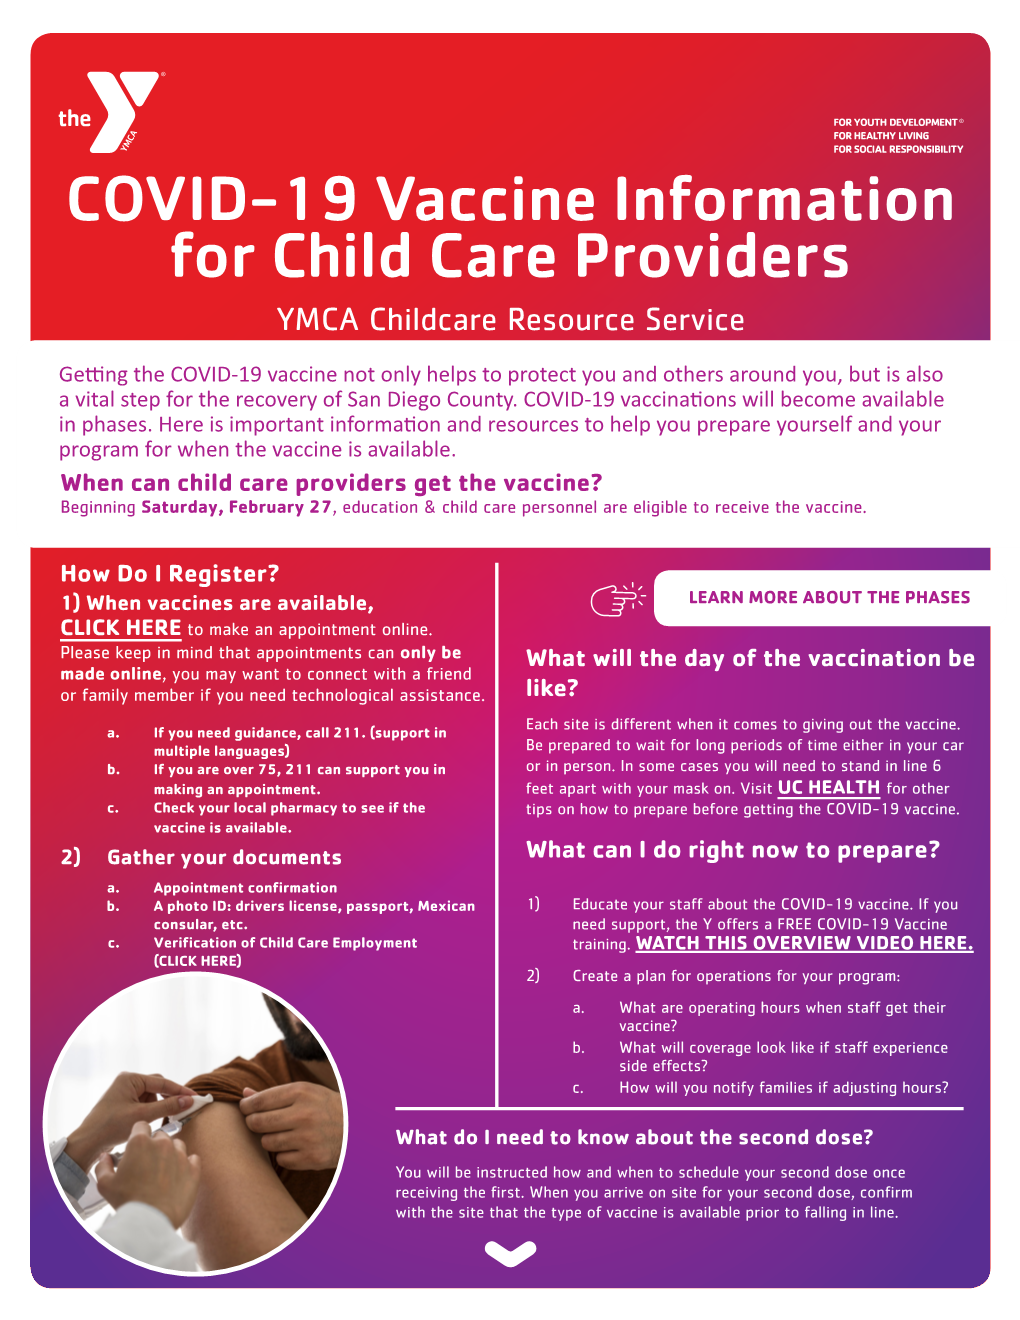 COVID-19 Vaccine Information for Child Care Providers YMCA Childcare Resource Service